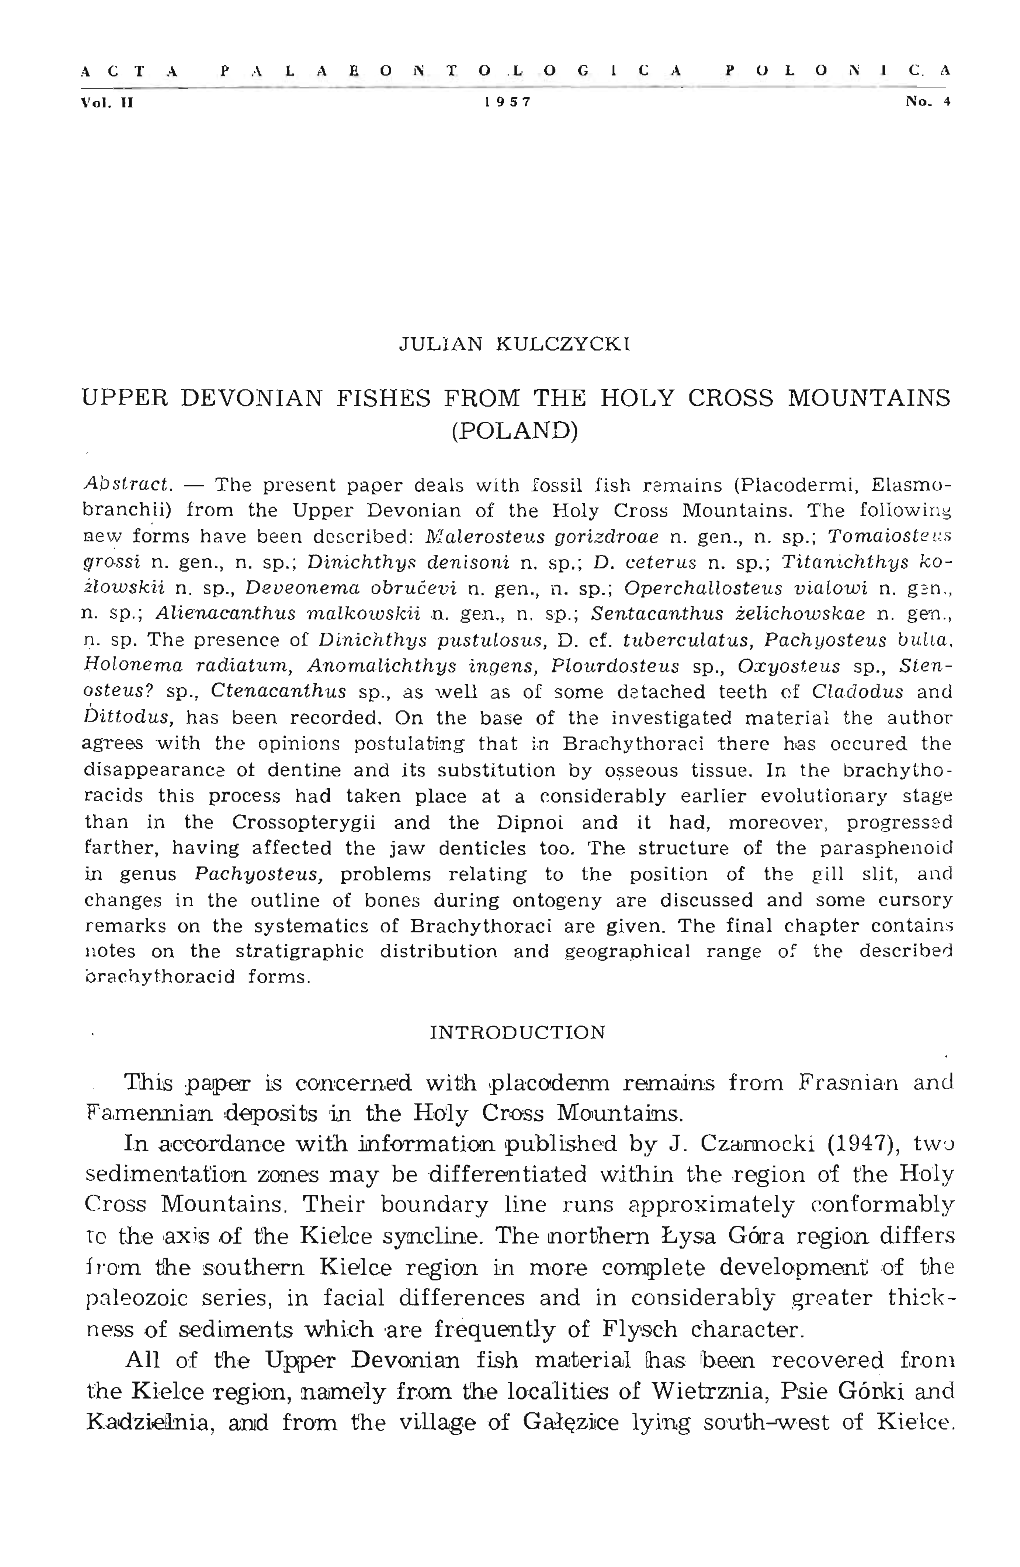 Upper Devonian Fishes from the Holy Cross Mountains (Poland)